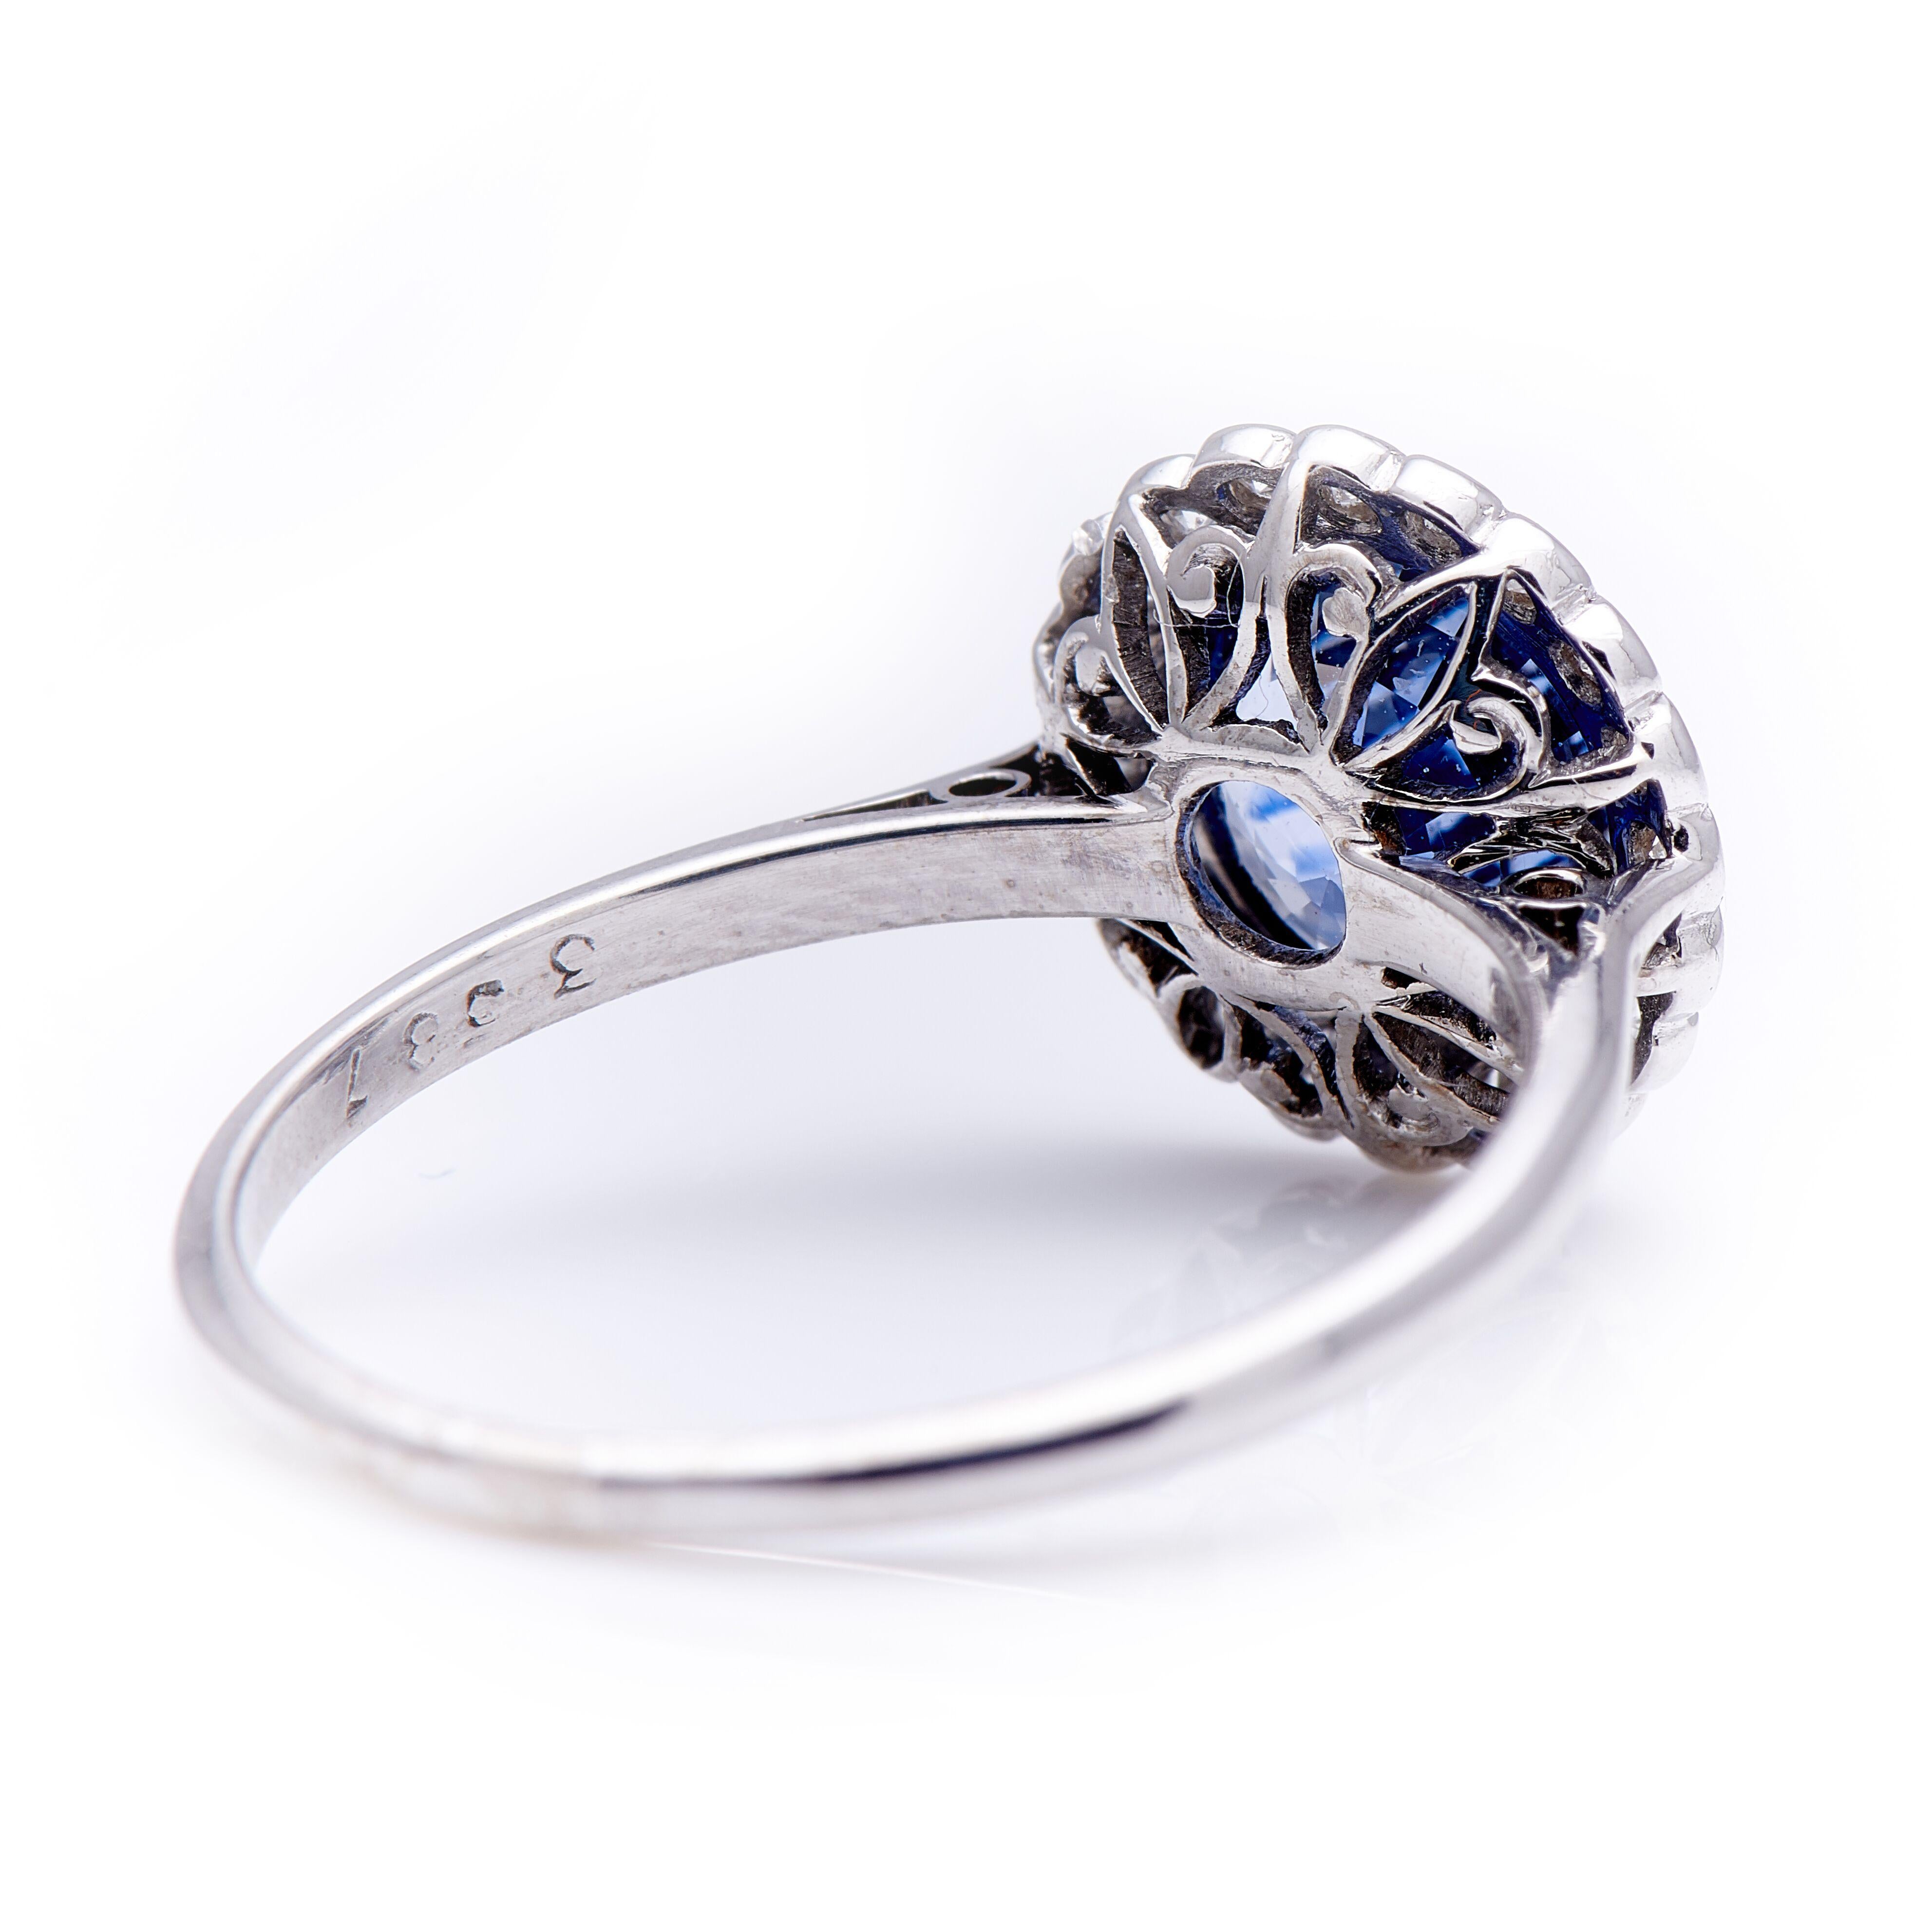 Old European Cut Antique, Edwardian 18 Carat White Gold, Sapphire and Diamond Cluster Ring